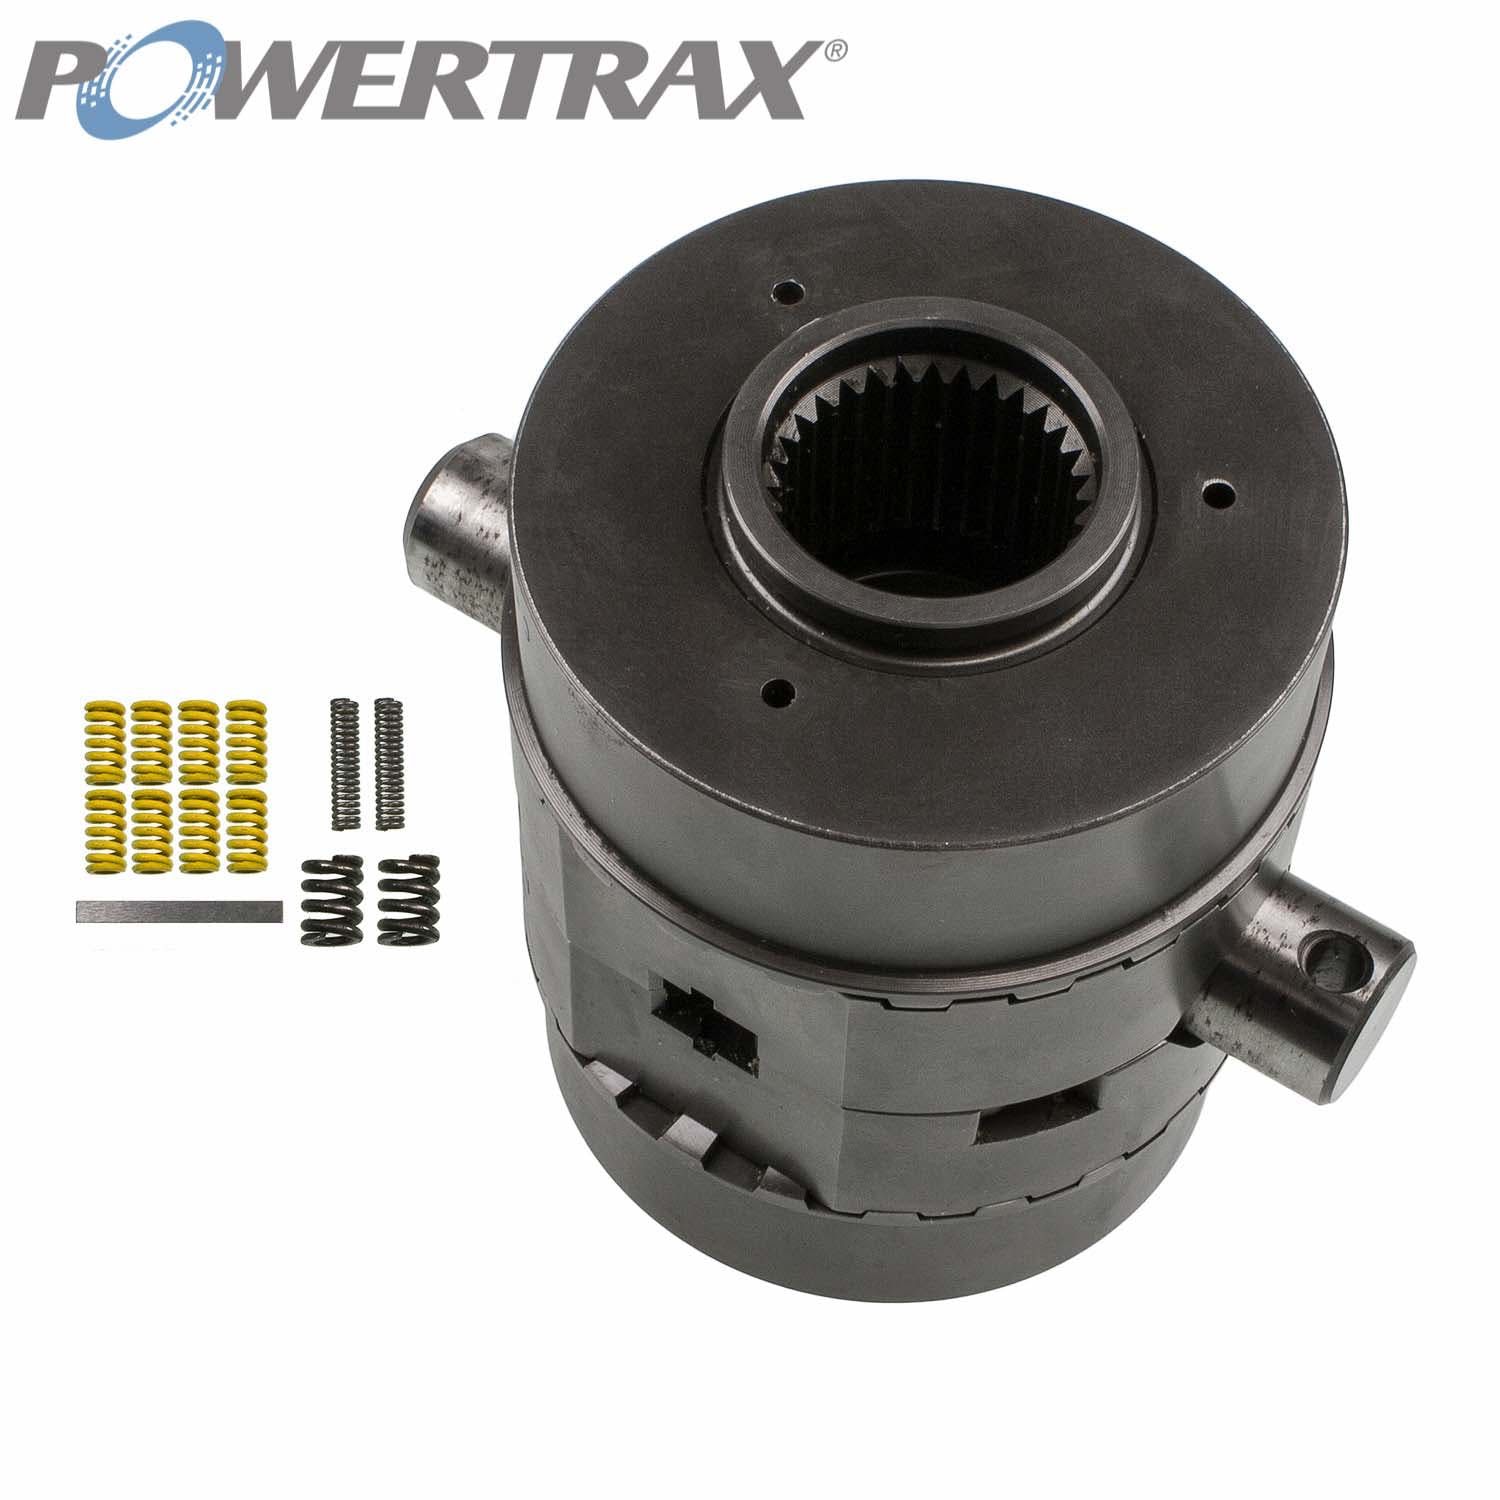 PowerTrax 9203923125 No-Slip Traction System